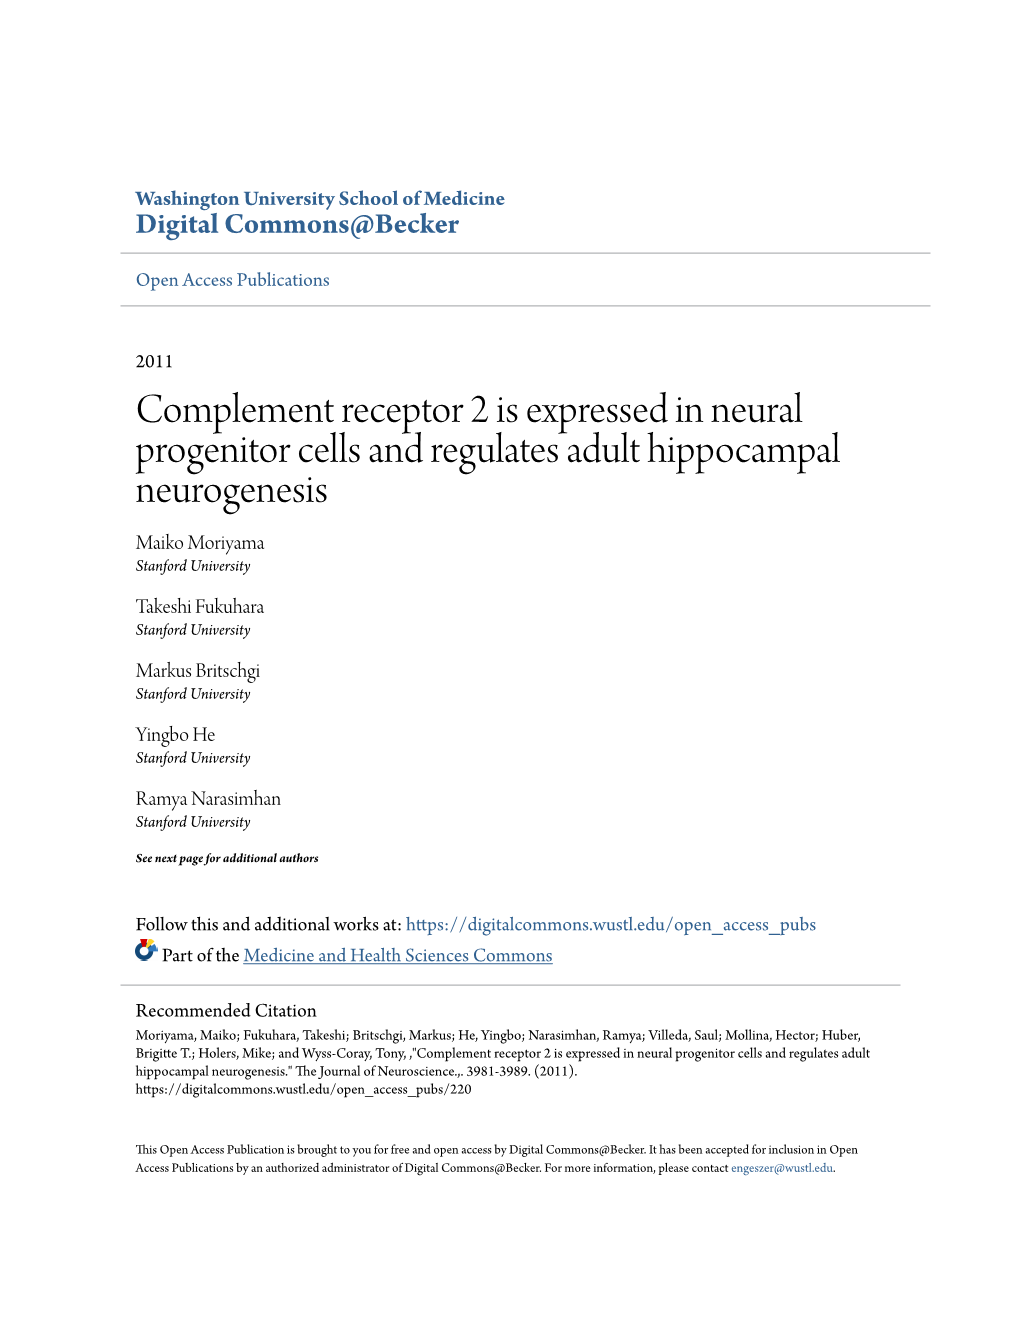 Complement Receptor 2 Is Expressed in Neural Progenitor Cells and Regulates Adult Hippocampal Neurogenesis Maiko Moriyama Stanford University